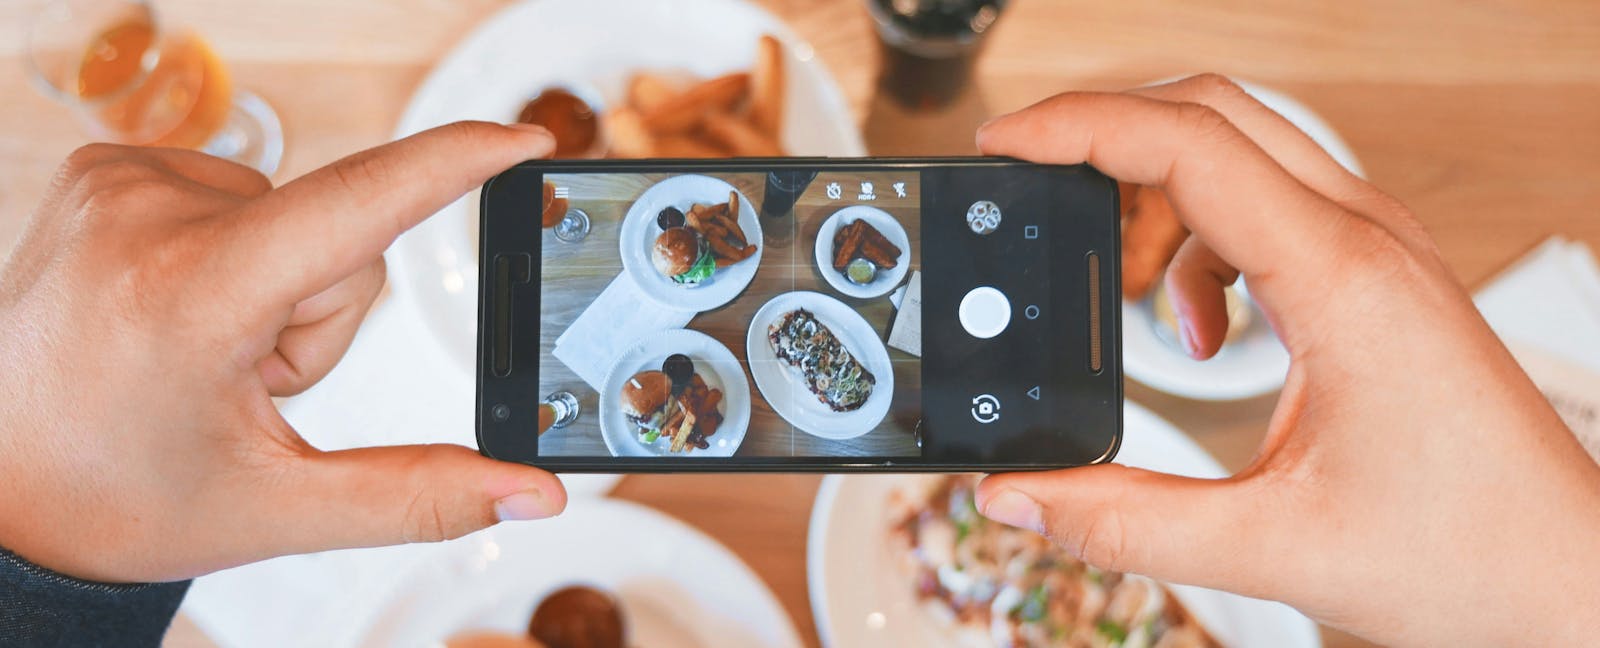 A foodie taking a picture of several dishes at a restaurant for Instagram.